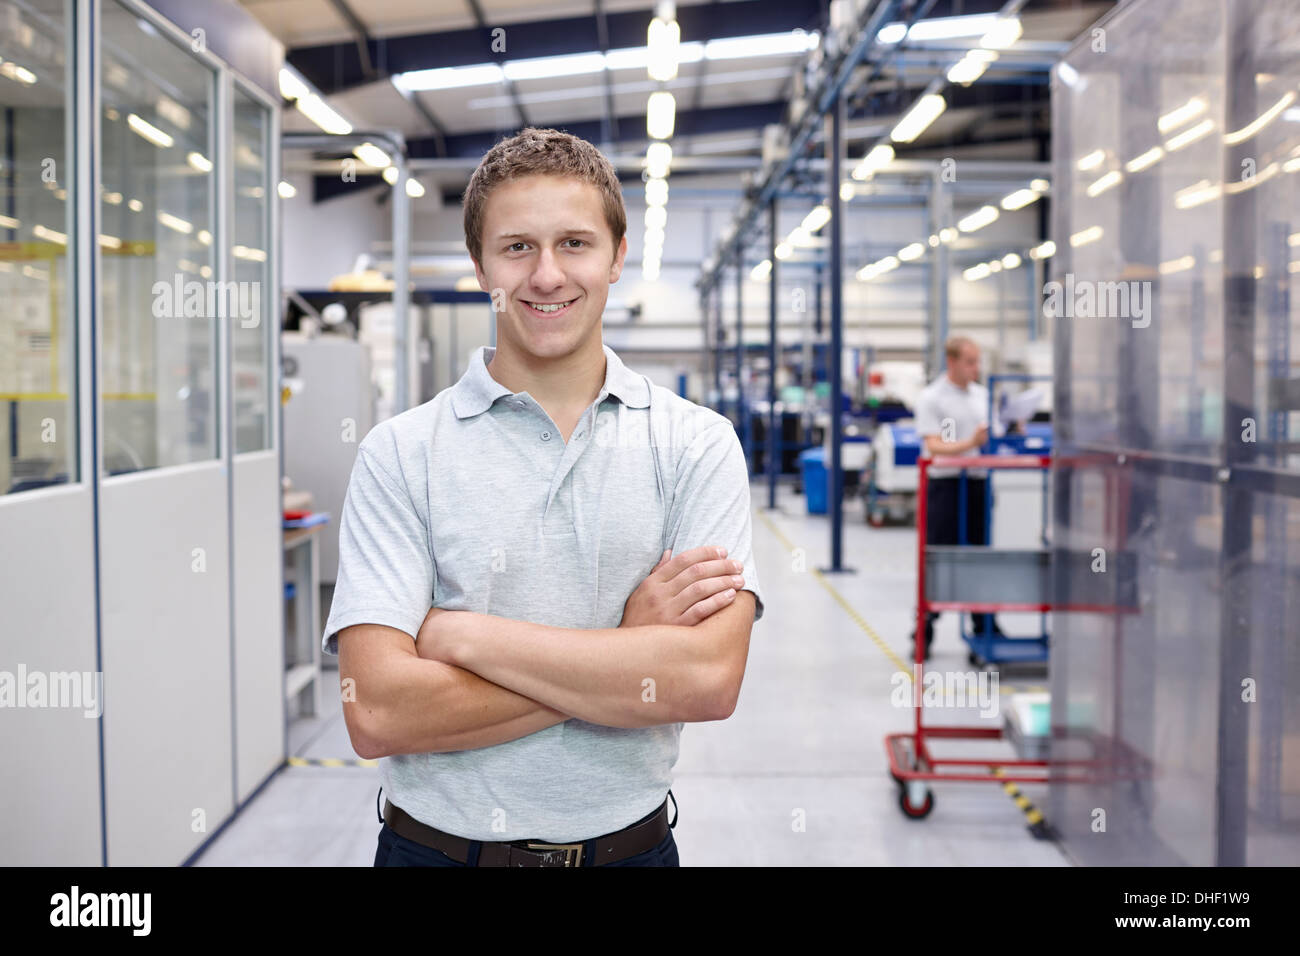 Portrait of worker with arms folded in engineering factory Banque D'Images